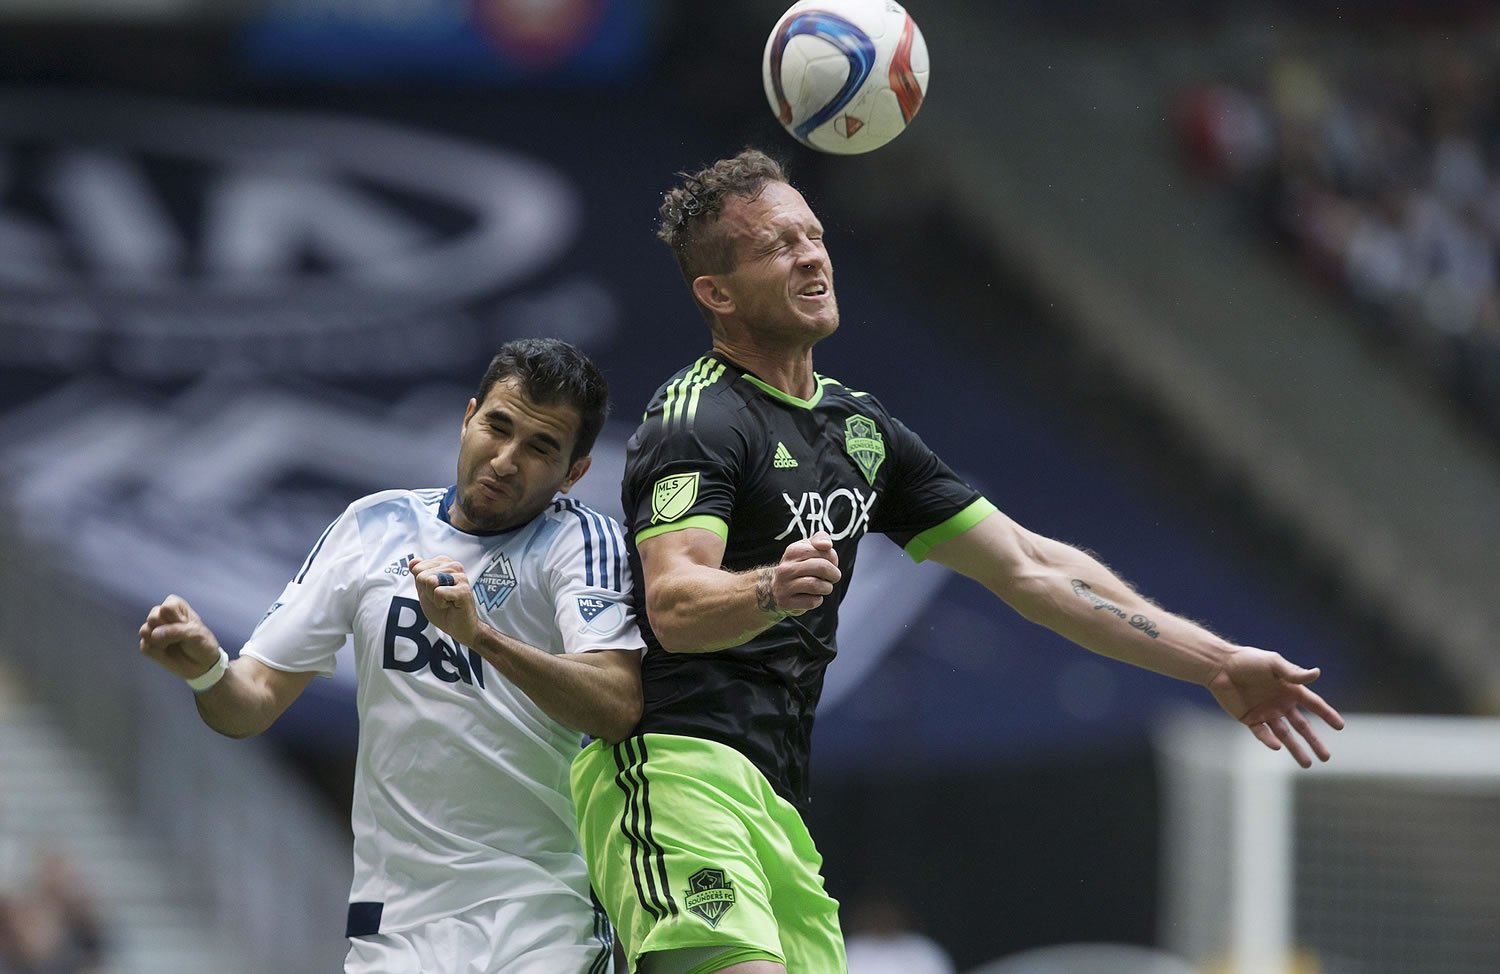 Seattle Sounders' Chad Barrett, right, out-jumps Vancouver Whitecaps' Steven Beitashour to get his head on the ball during the first half in Vancouver, British Columbia, on Saturday, May 16, 2015.